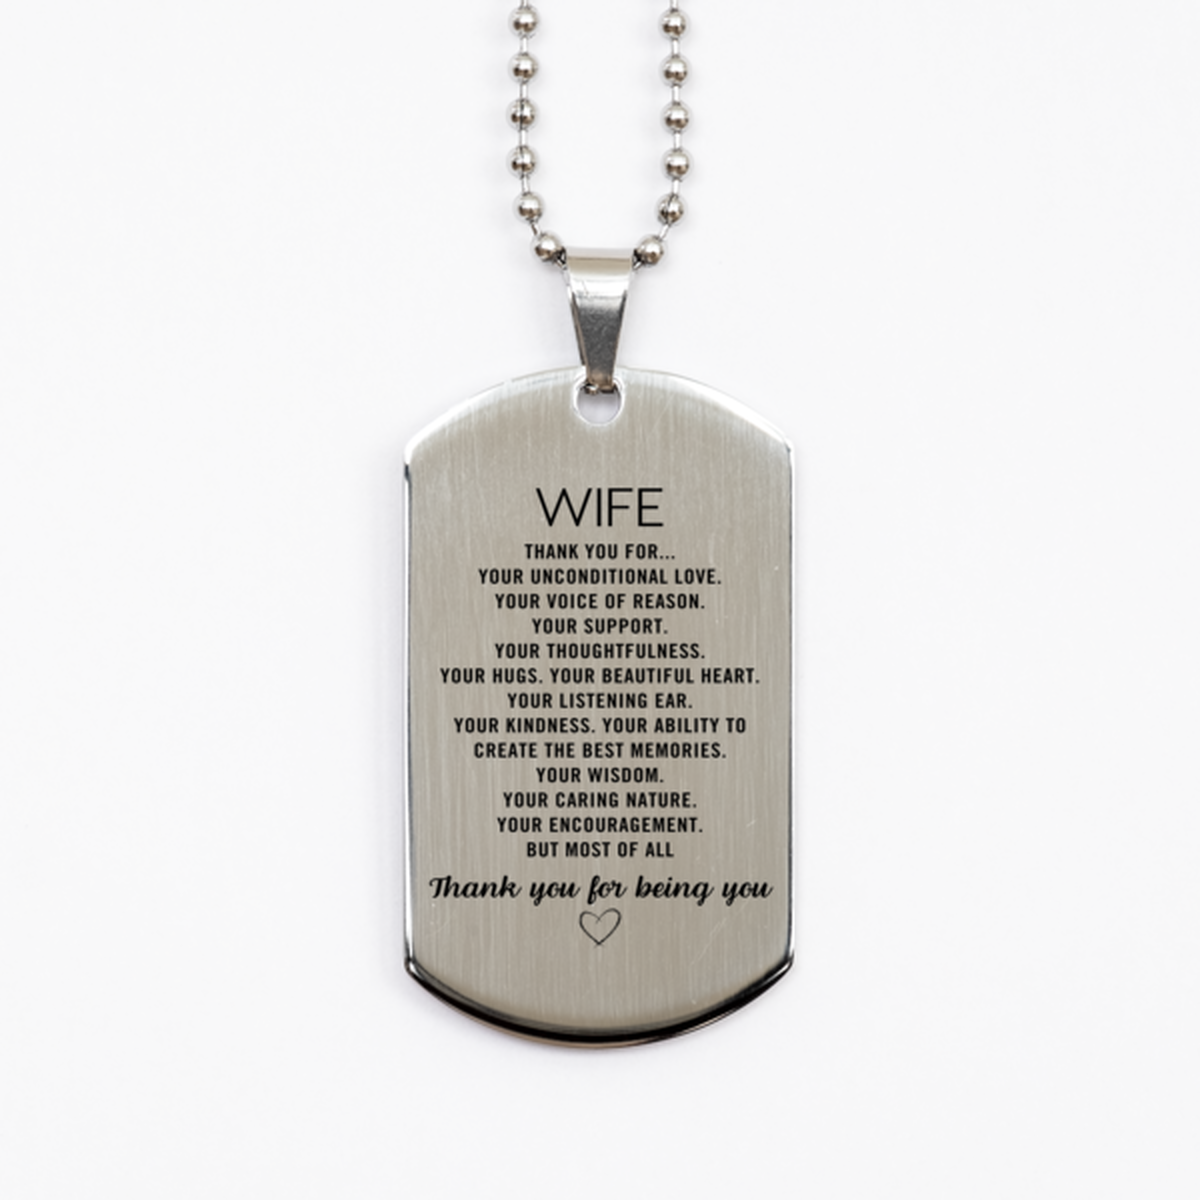 Wife Silver Dog Tag Custom, Engraved Gifts For Wife Christmas Graduation Birthday Gifts for Men Women Wife Thank you for Your unconditional love